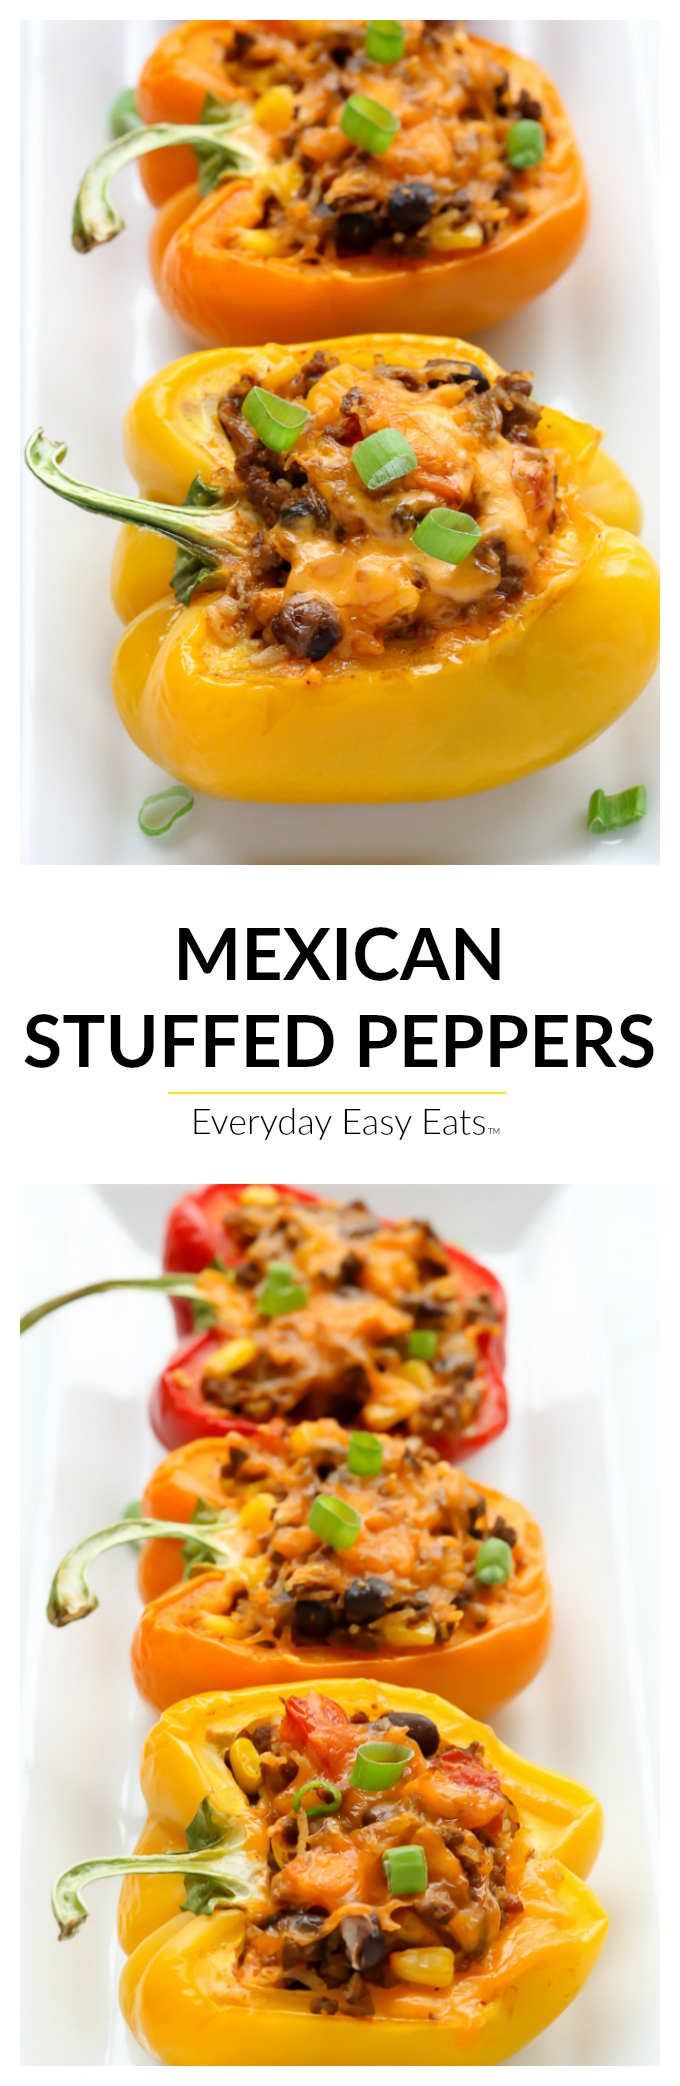 This easy Mexican Stuffed Peppers recipe is made with beef, rice, vegetables and cheese. It makes a spicy, healthy meal that is also gluten-free!